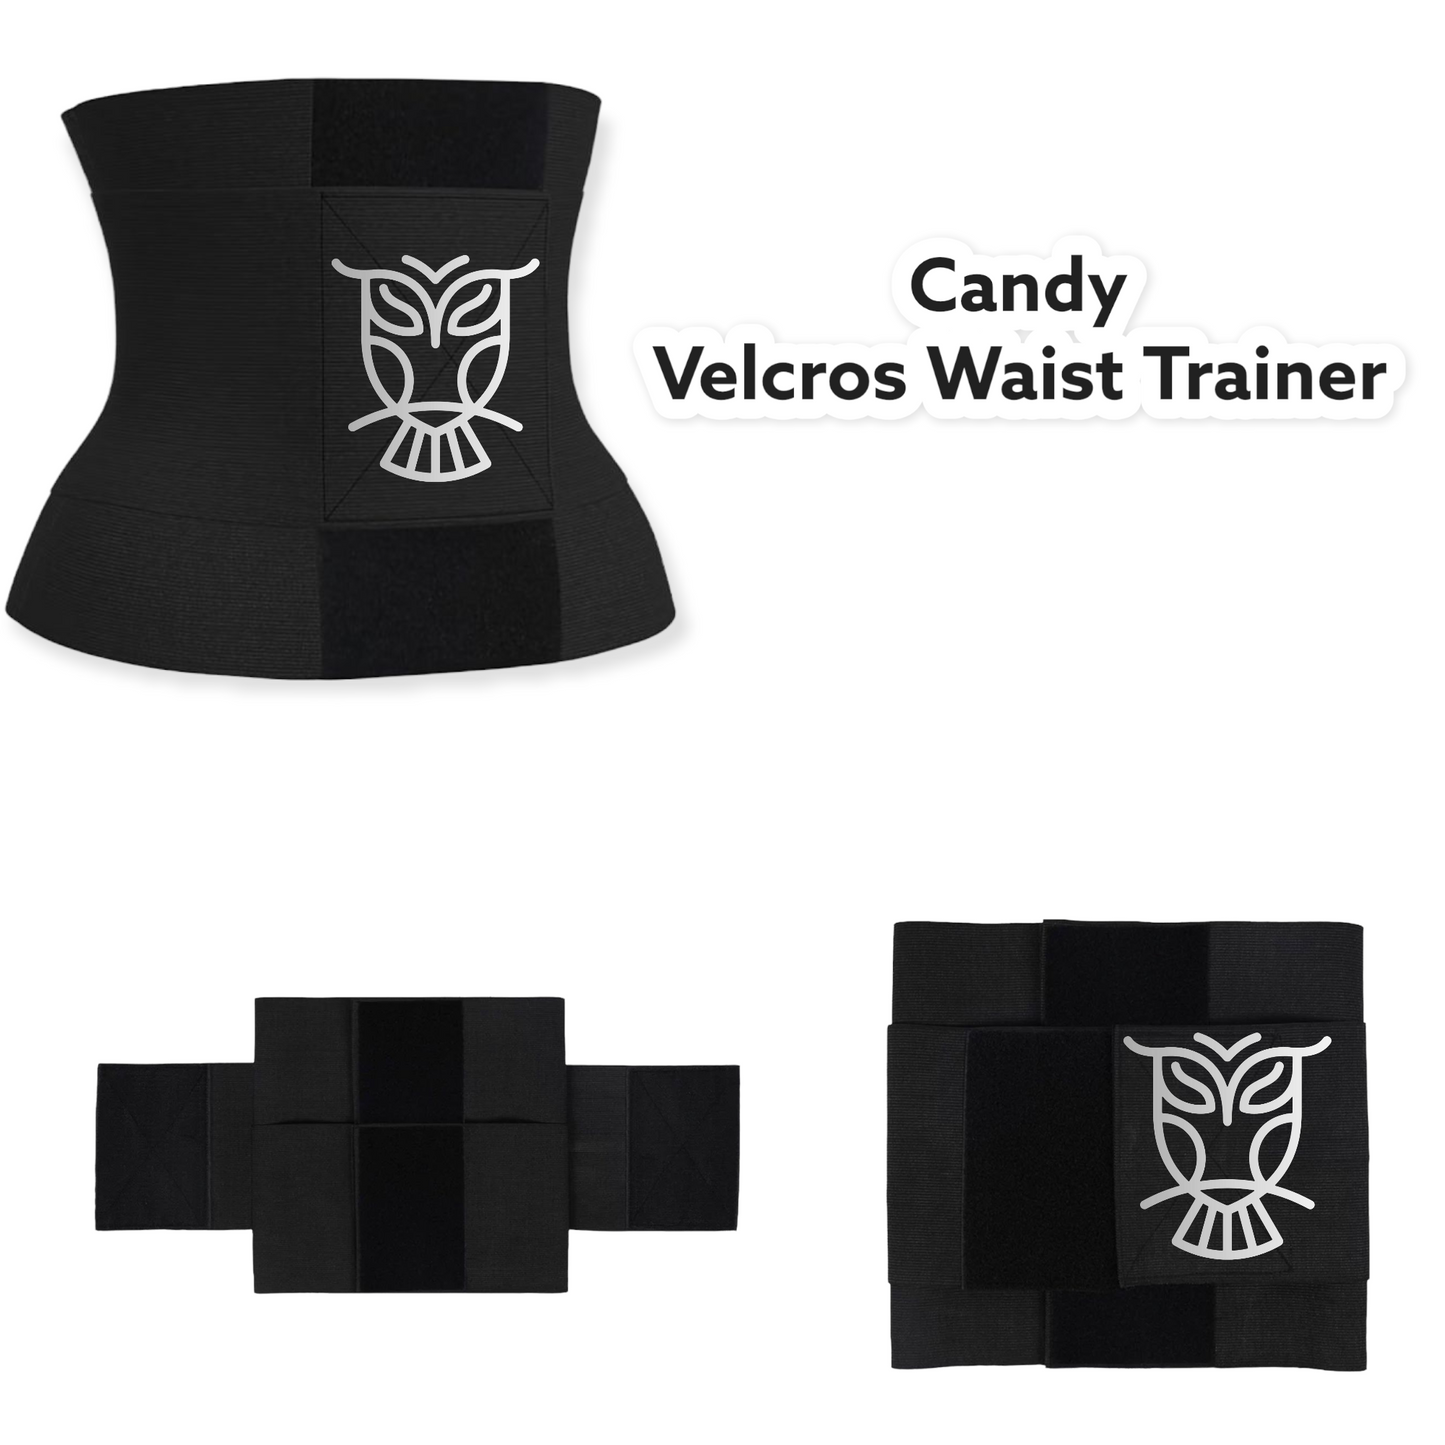 Velcros Candy wait trainer